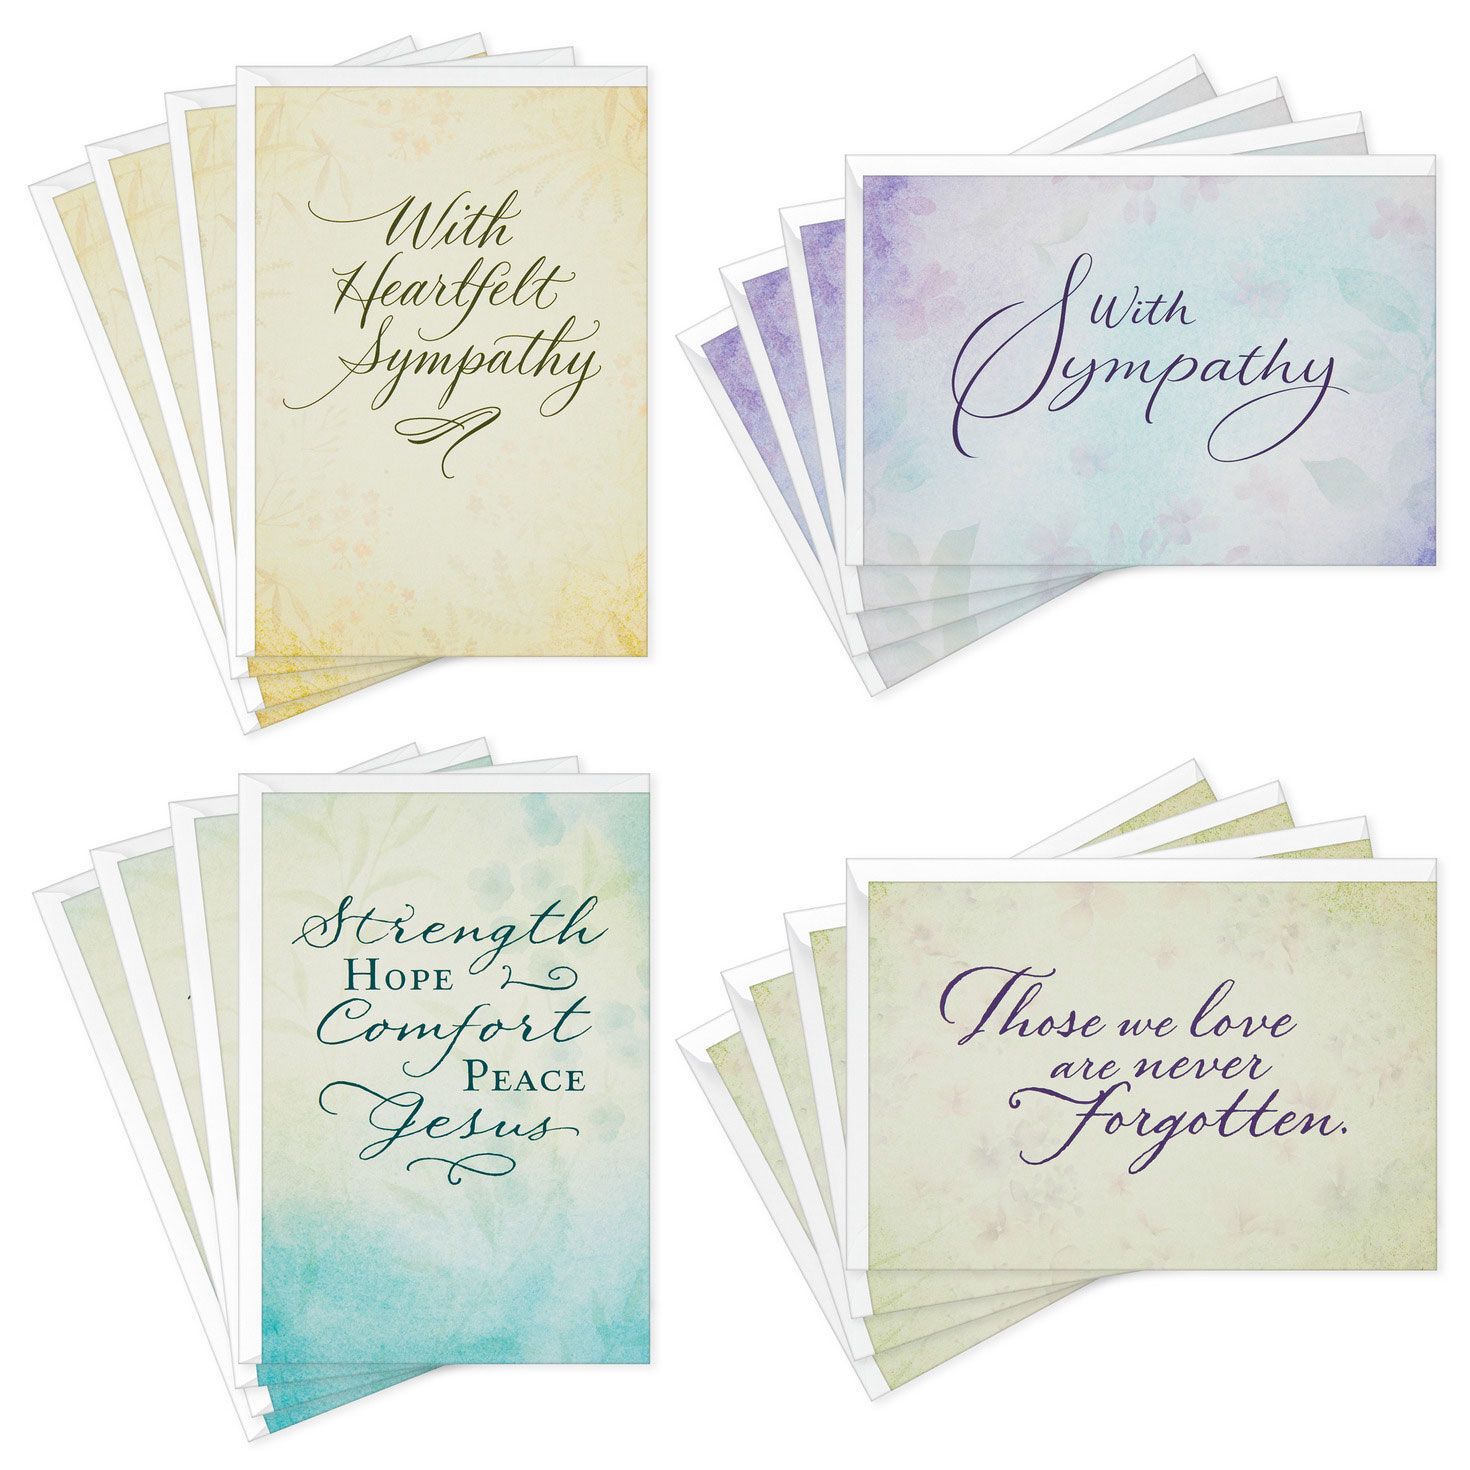 Simply Stated Boxed Religious Sympathy Cards Assortment, Pack of 12 for only USD 6.99 | Hallmark